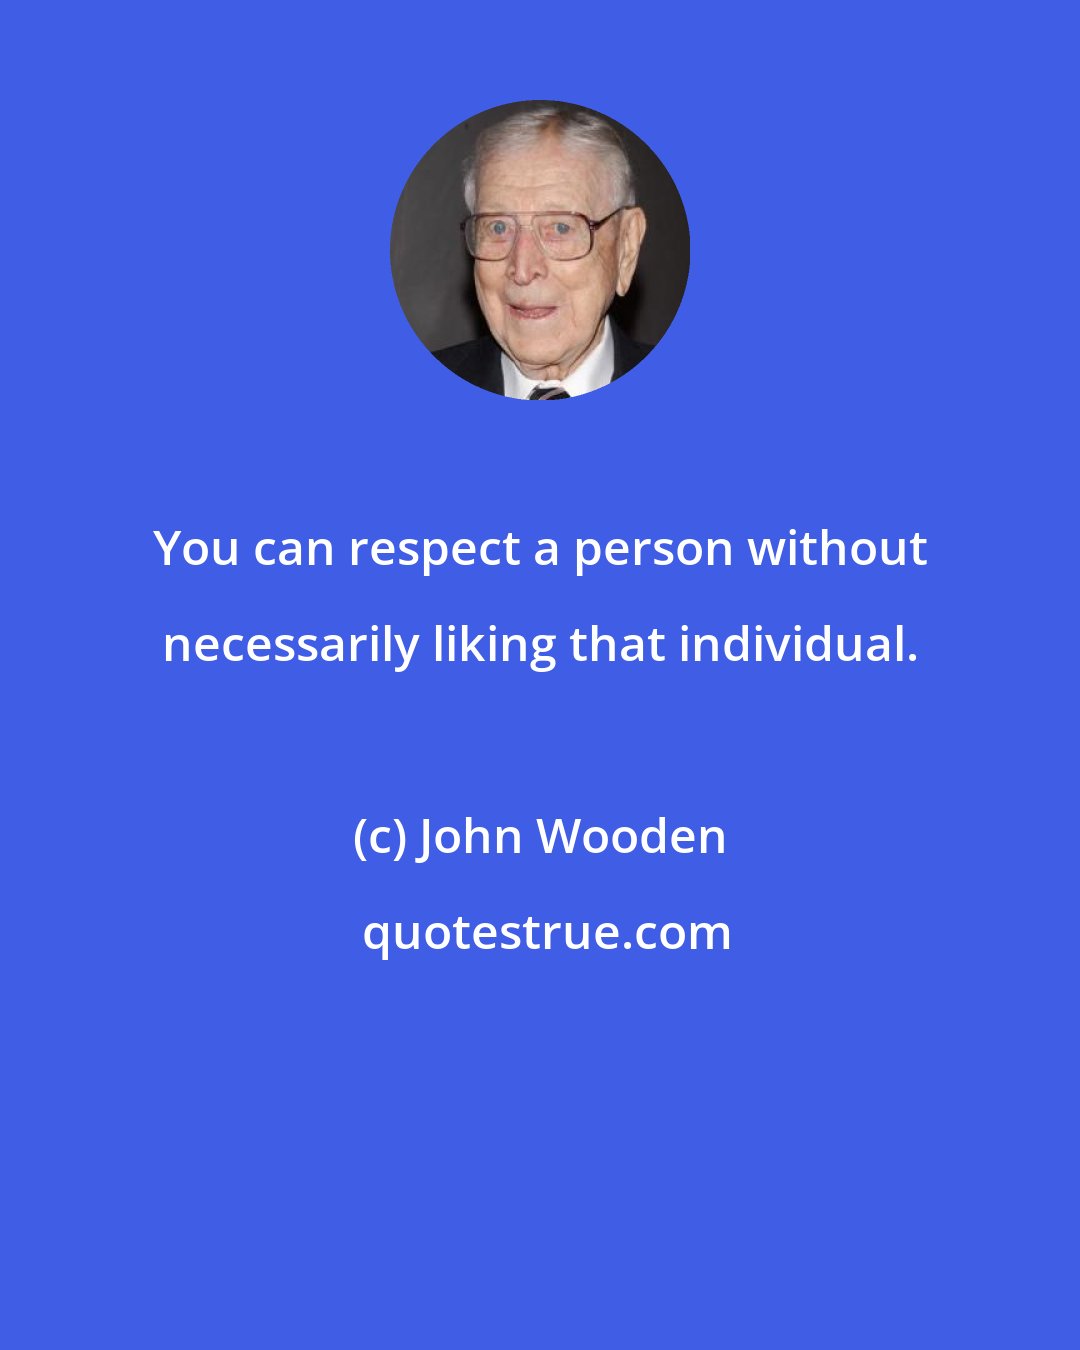 John Wooden: You can respect a person without necessarily liking that individual.